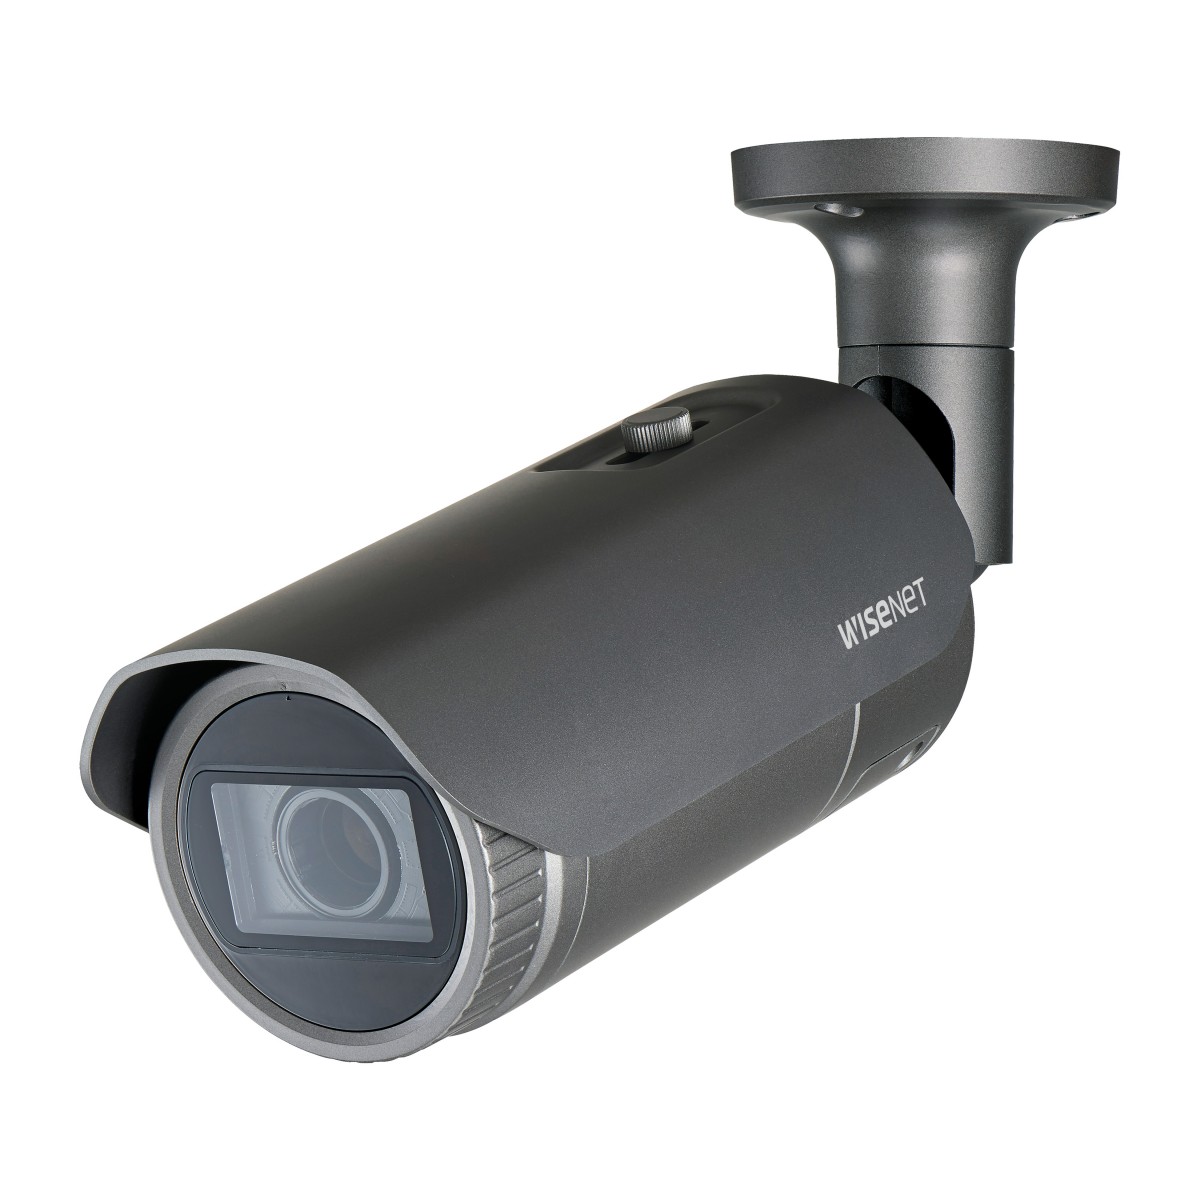 Hanwha Techwin Hanwha QNO-8080R - IP security camera - Outdoor - Wired - Bullet - Ceiling/wall - Grey